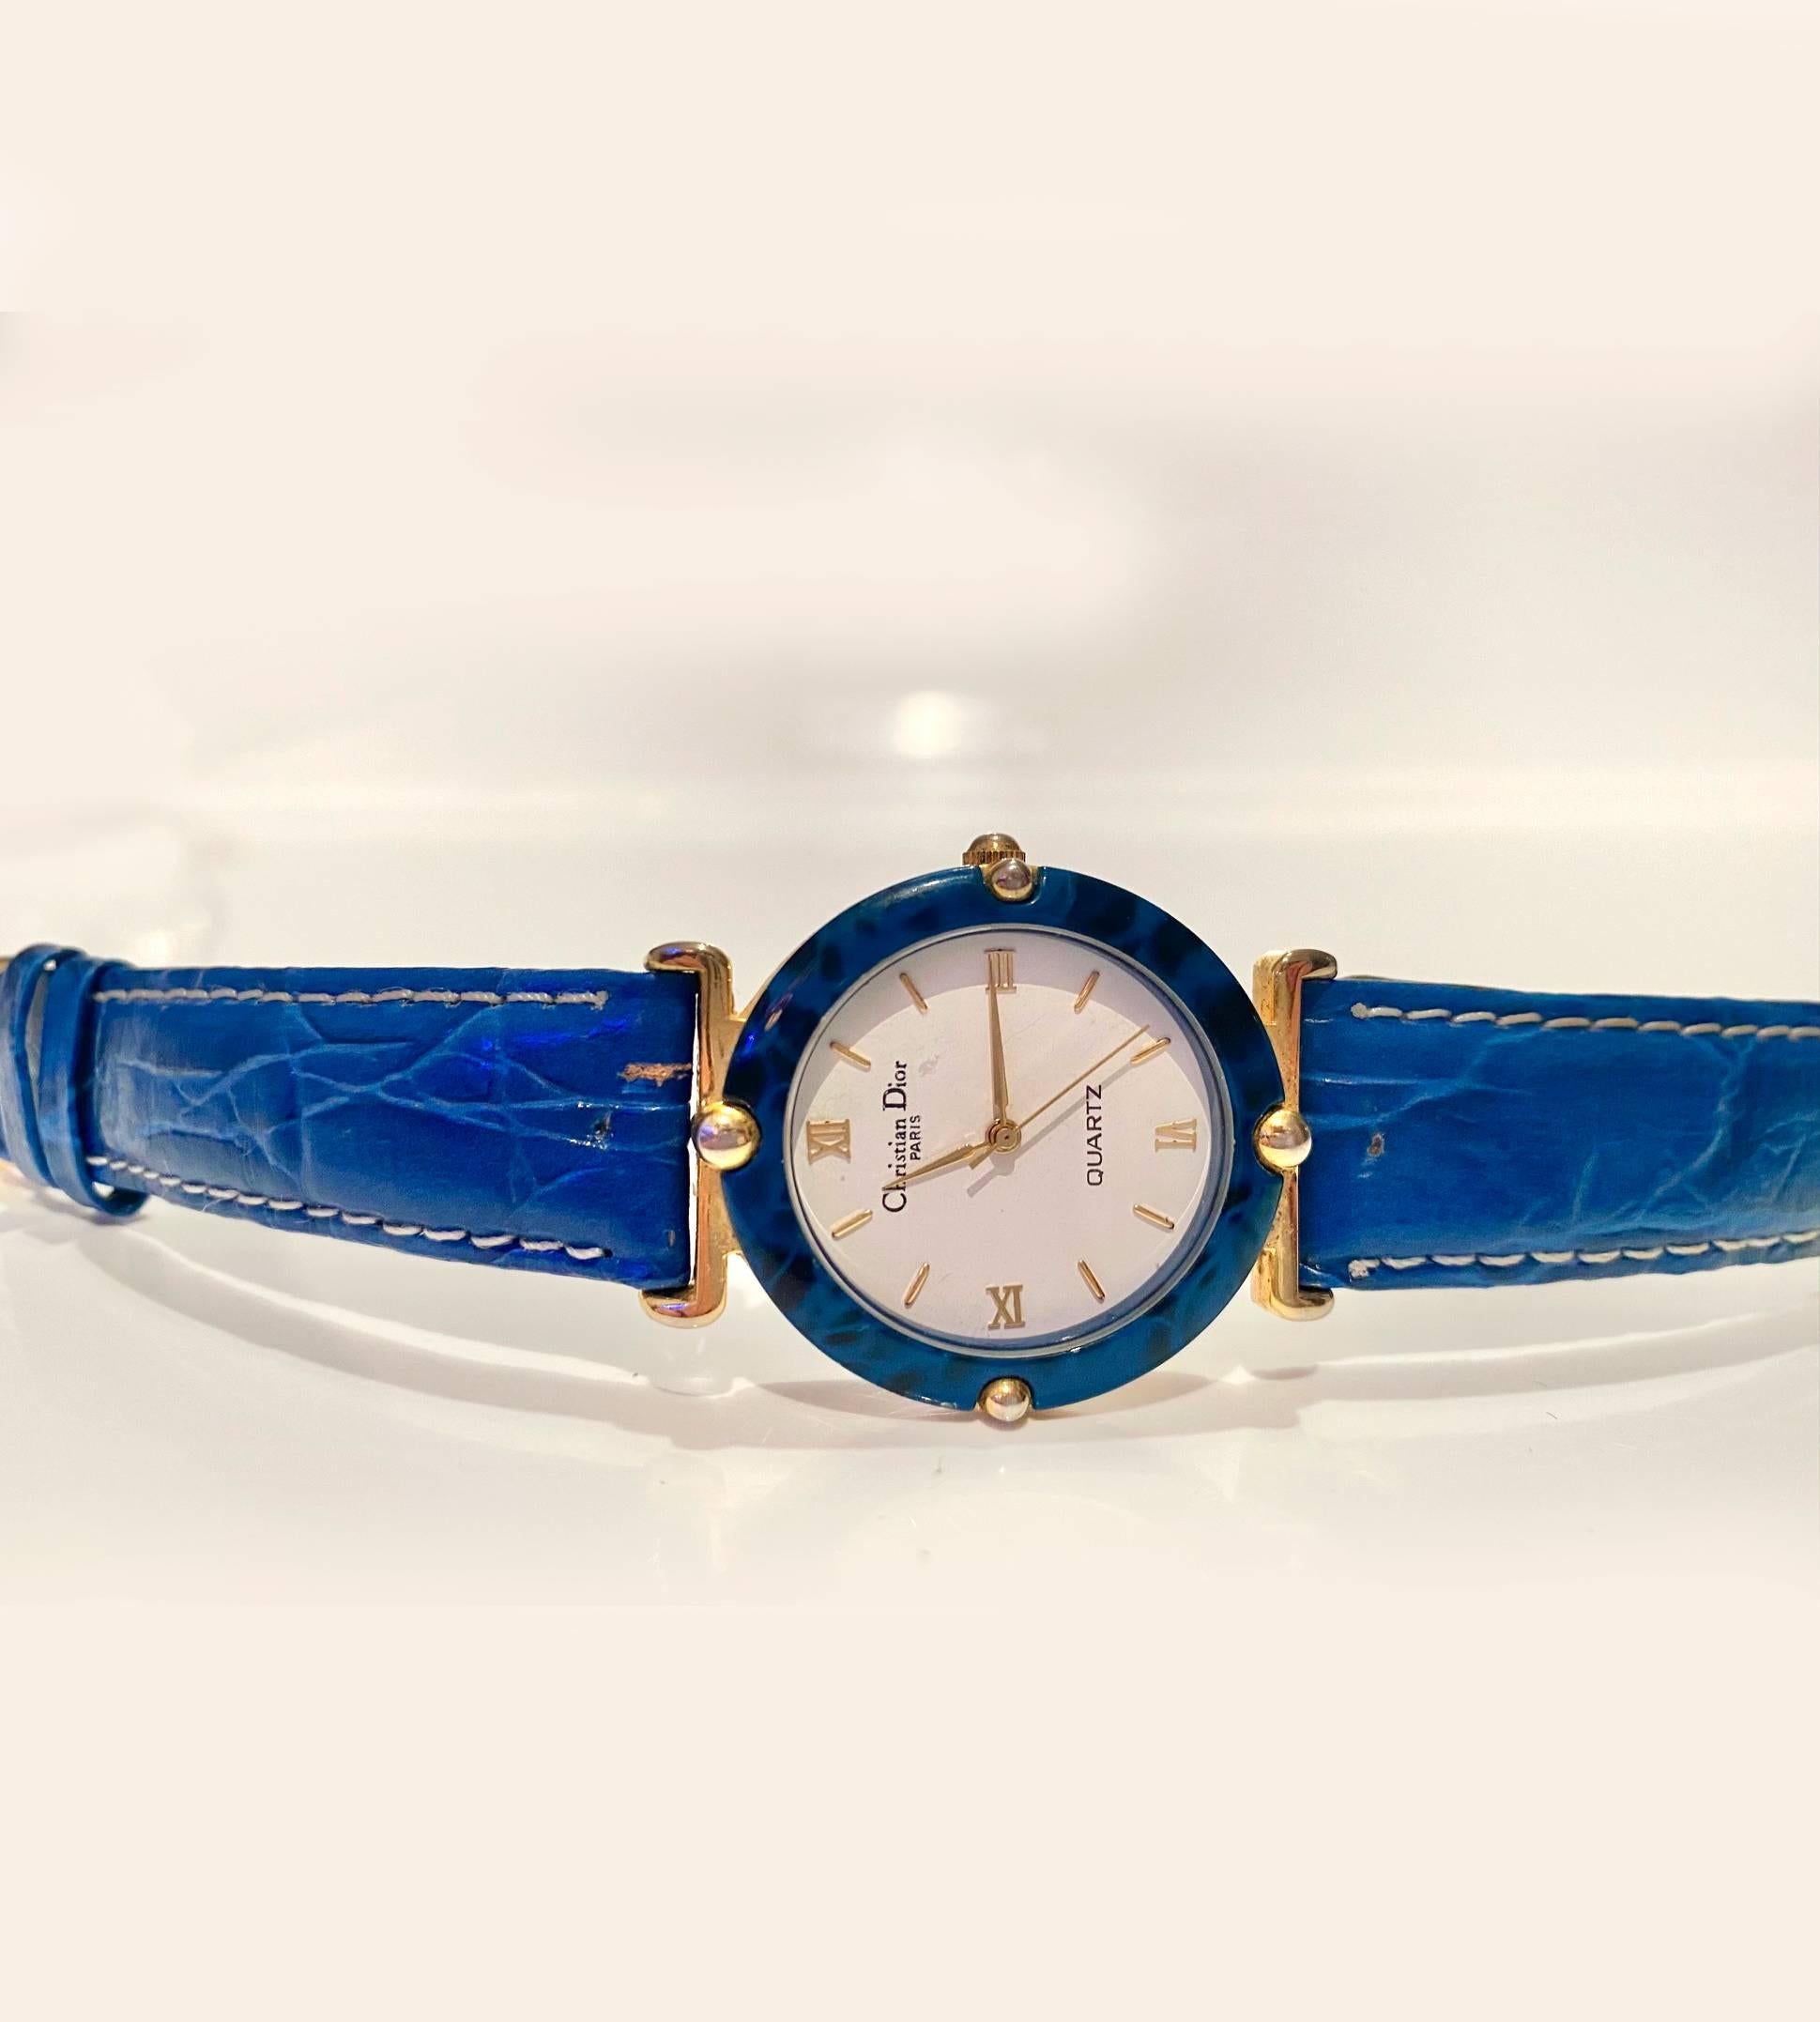 Vintage Christian Dior quartz watch, blue stone round face, Roman numbers, gold tone, water resistant, original blue leather strap signed Dior 

Condition: very good vintage, 1980s, fully working, slight wear on strap, barely visible 

Measurements: